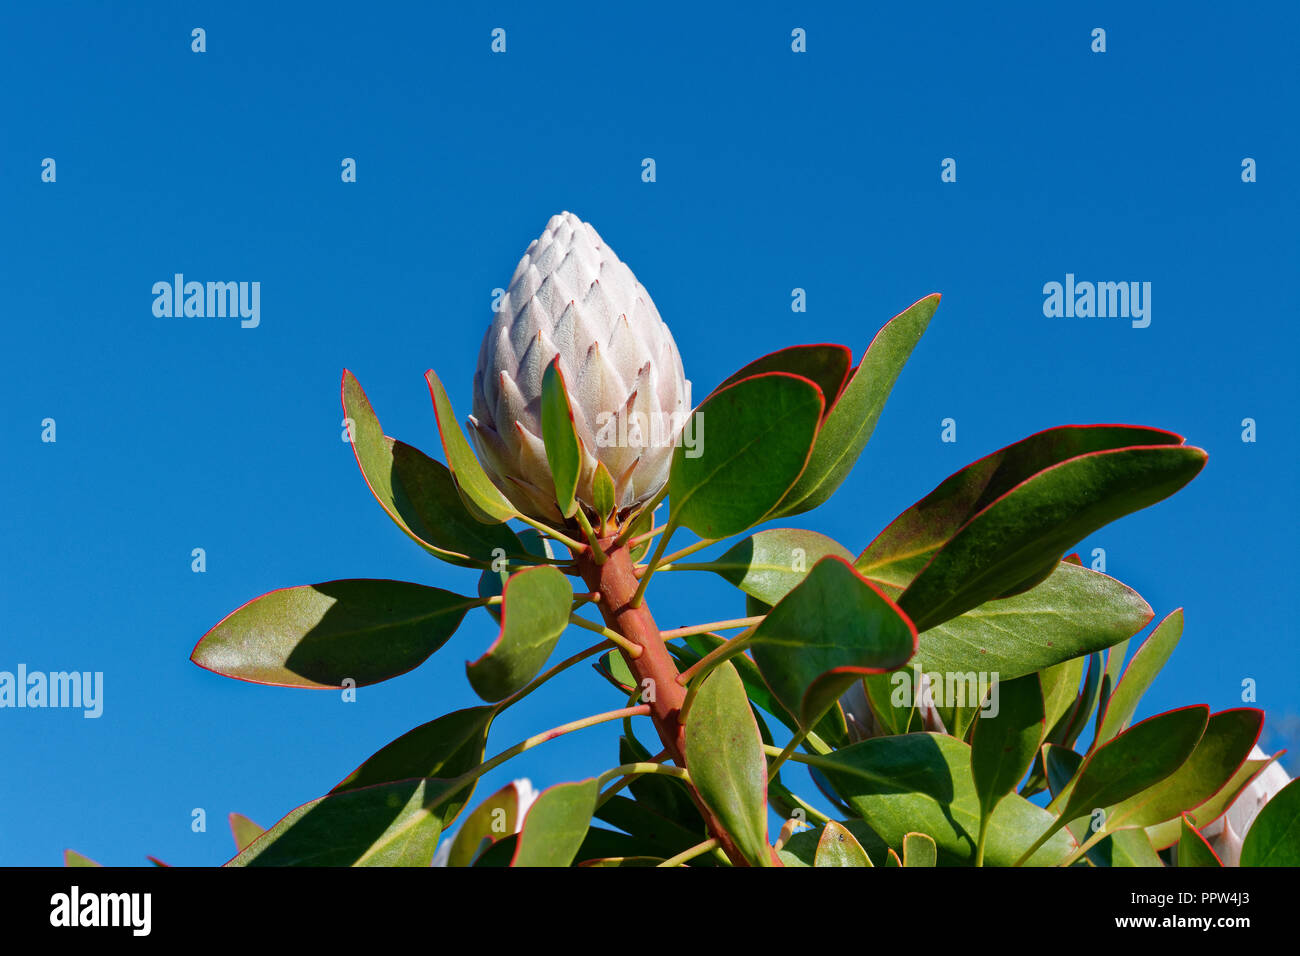 A single pink protea bud against the blue sky Stock Photo